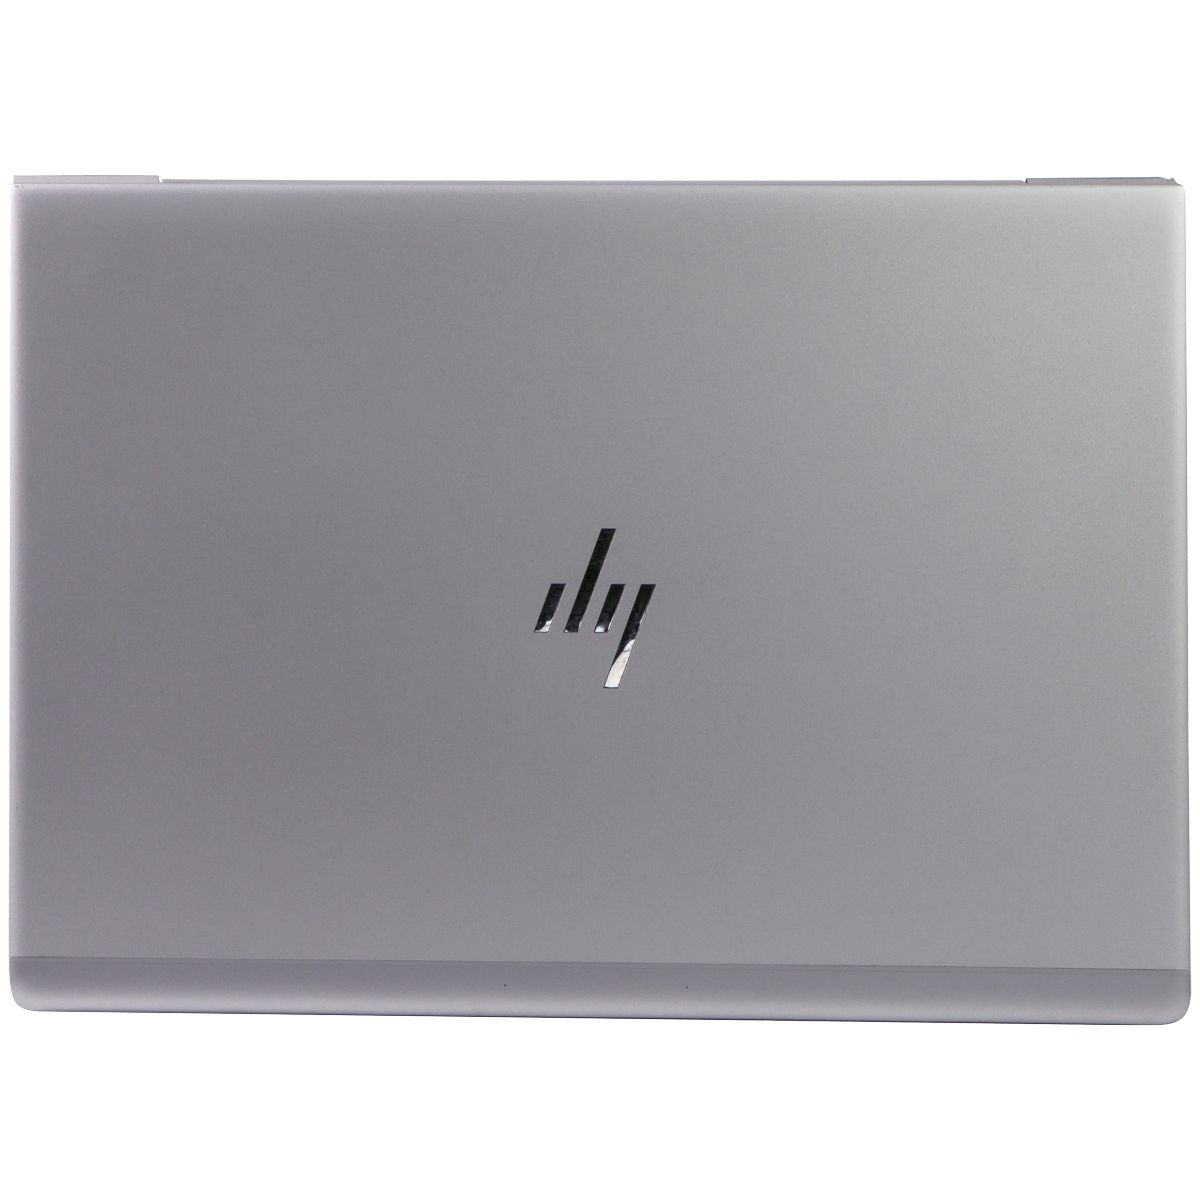 HP EliteBook 840 G5 (14.0-in) FHD Touch Laptop i5-8250U/256GB/16GB/Win 10 Home Laptops - PC Laptops & Netbooks HP Enterprise    - Simple Cell Bulk Wholesale Pricing - USA Seller